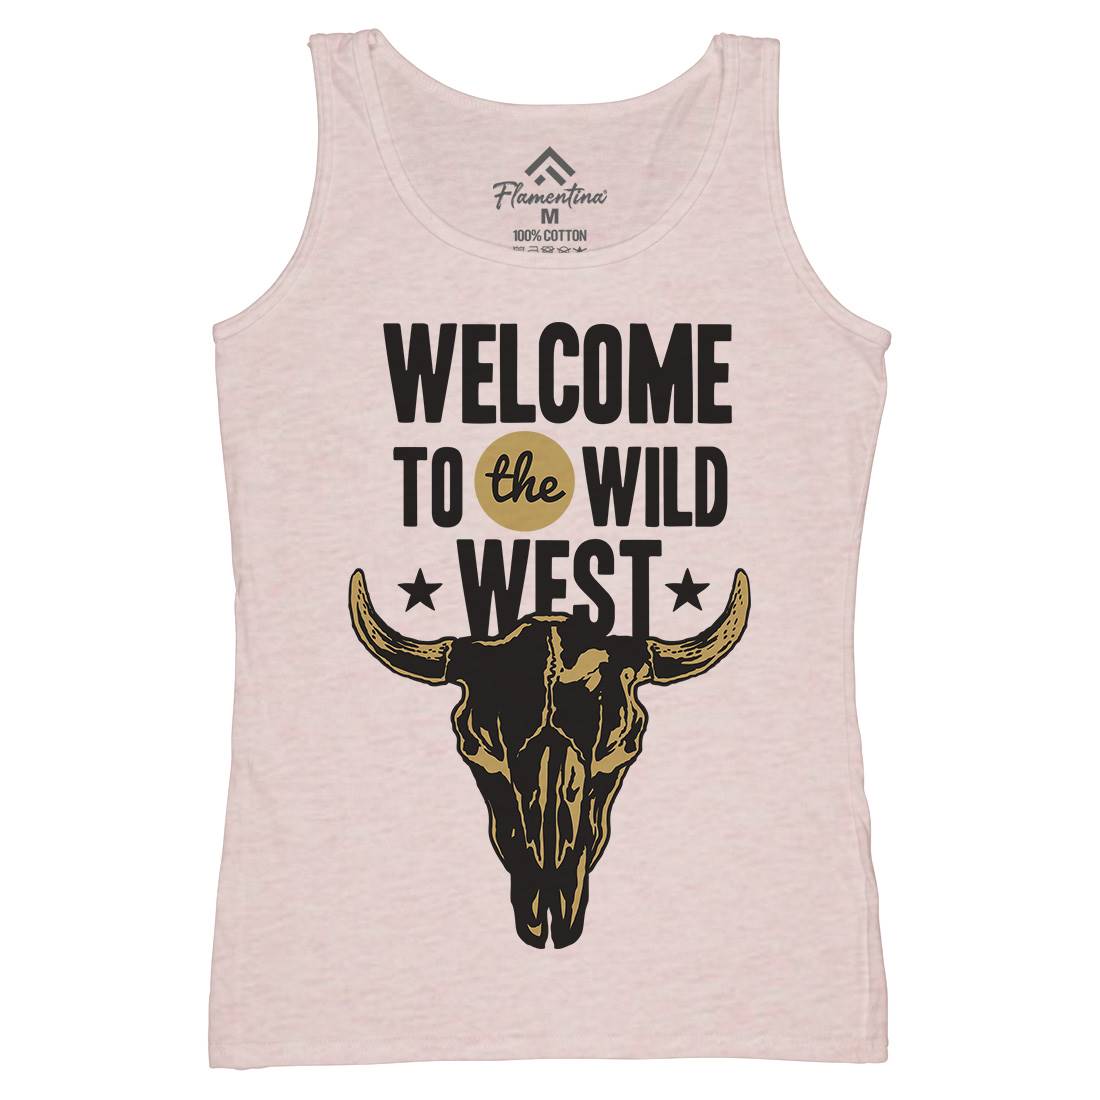 Welcome To The Wild West Womens Organic Tank Top Vest American A393